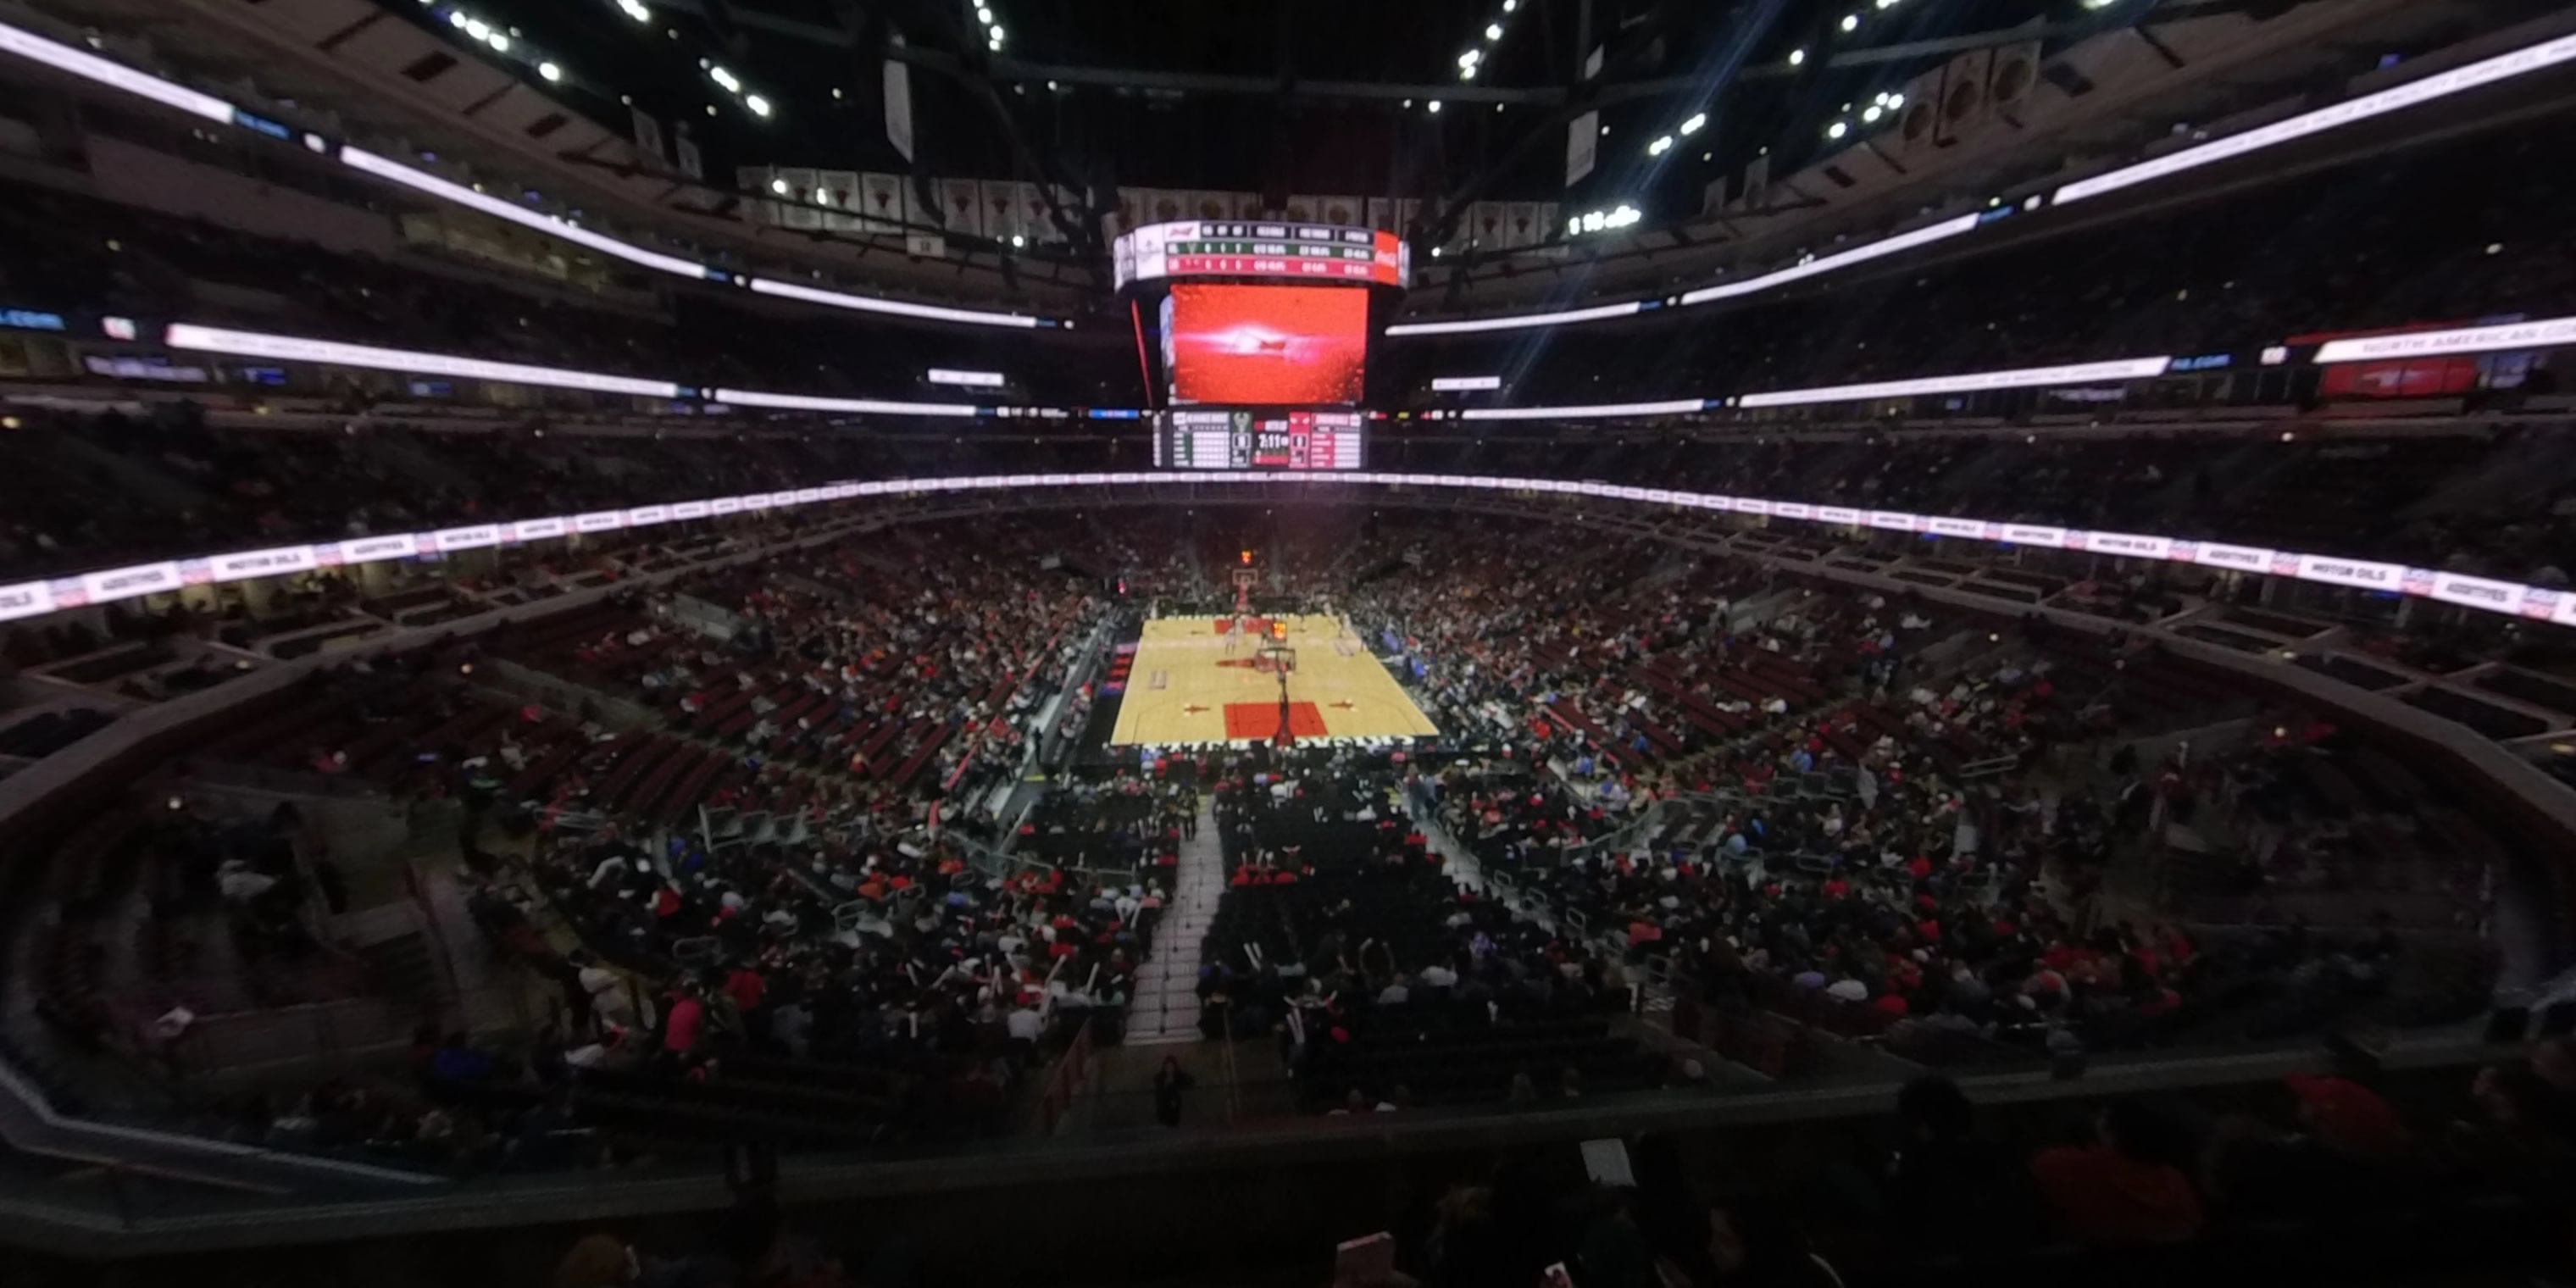 section 209 panoramic seat view  for basketball - united center